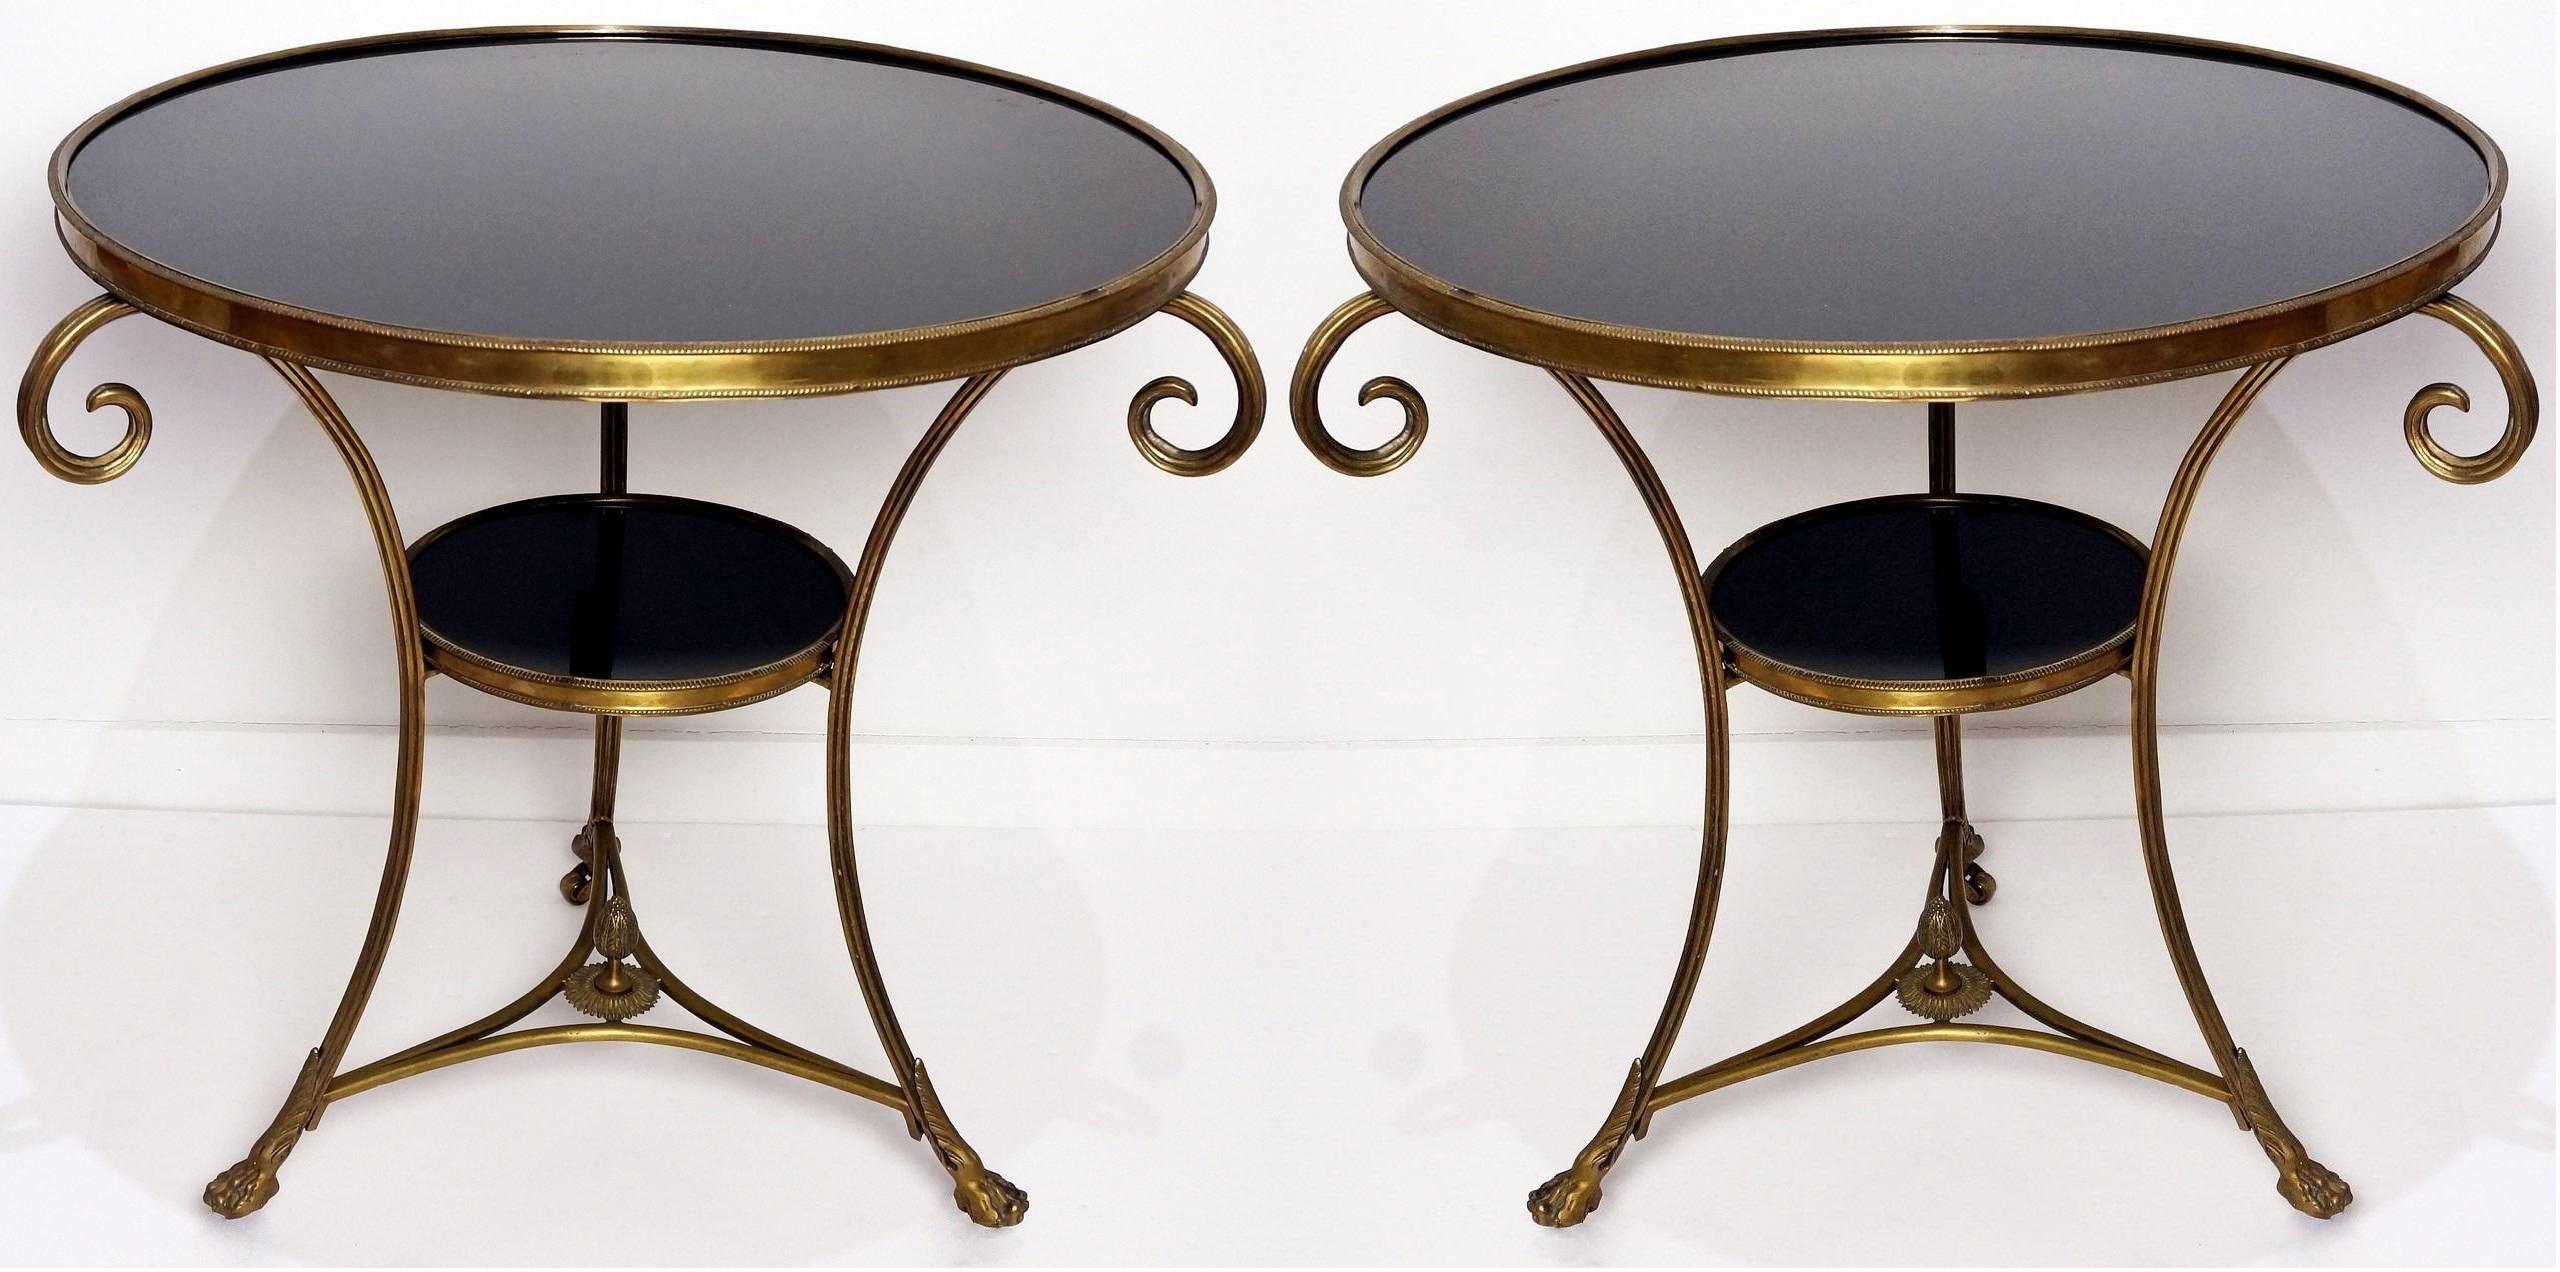 Elegant pair of guéridons. The tables present a French circular variegated black marble top within an ormolu border. Each piece rests on three inward curved bronze legs terminating in hoof feet. The legs are connected by a concave-sided tri-form